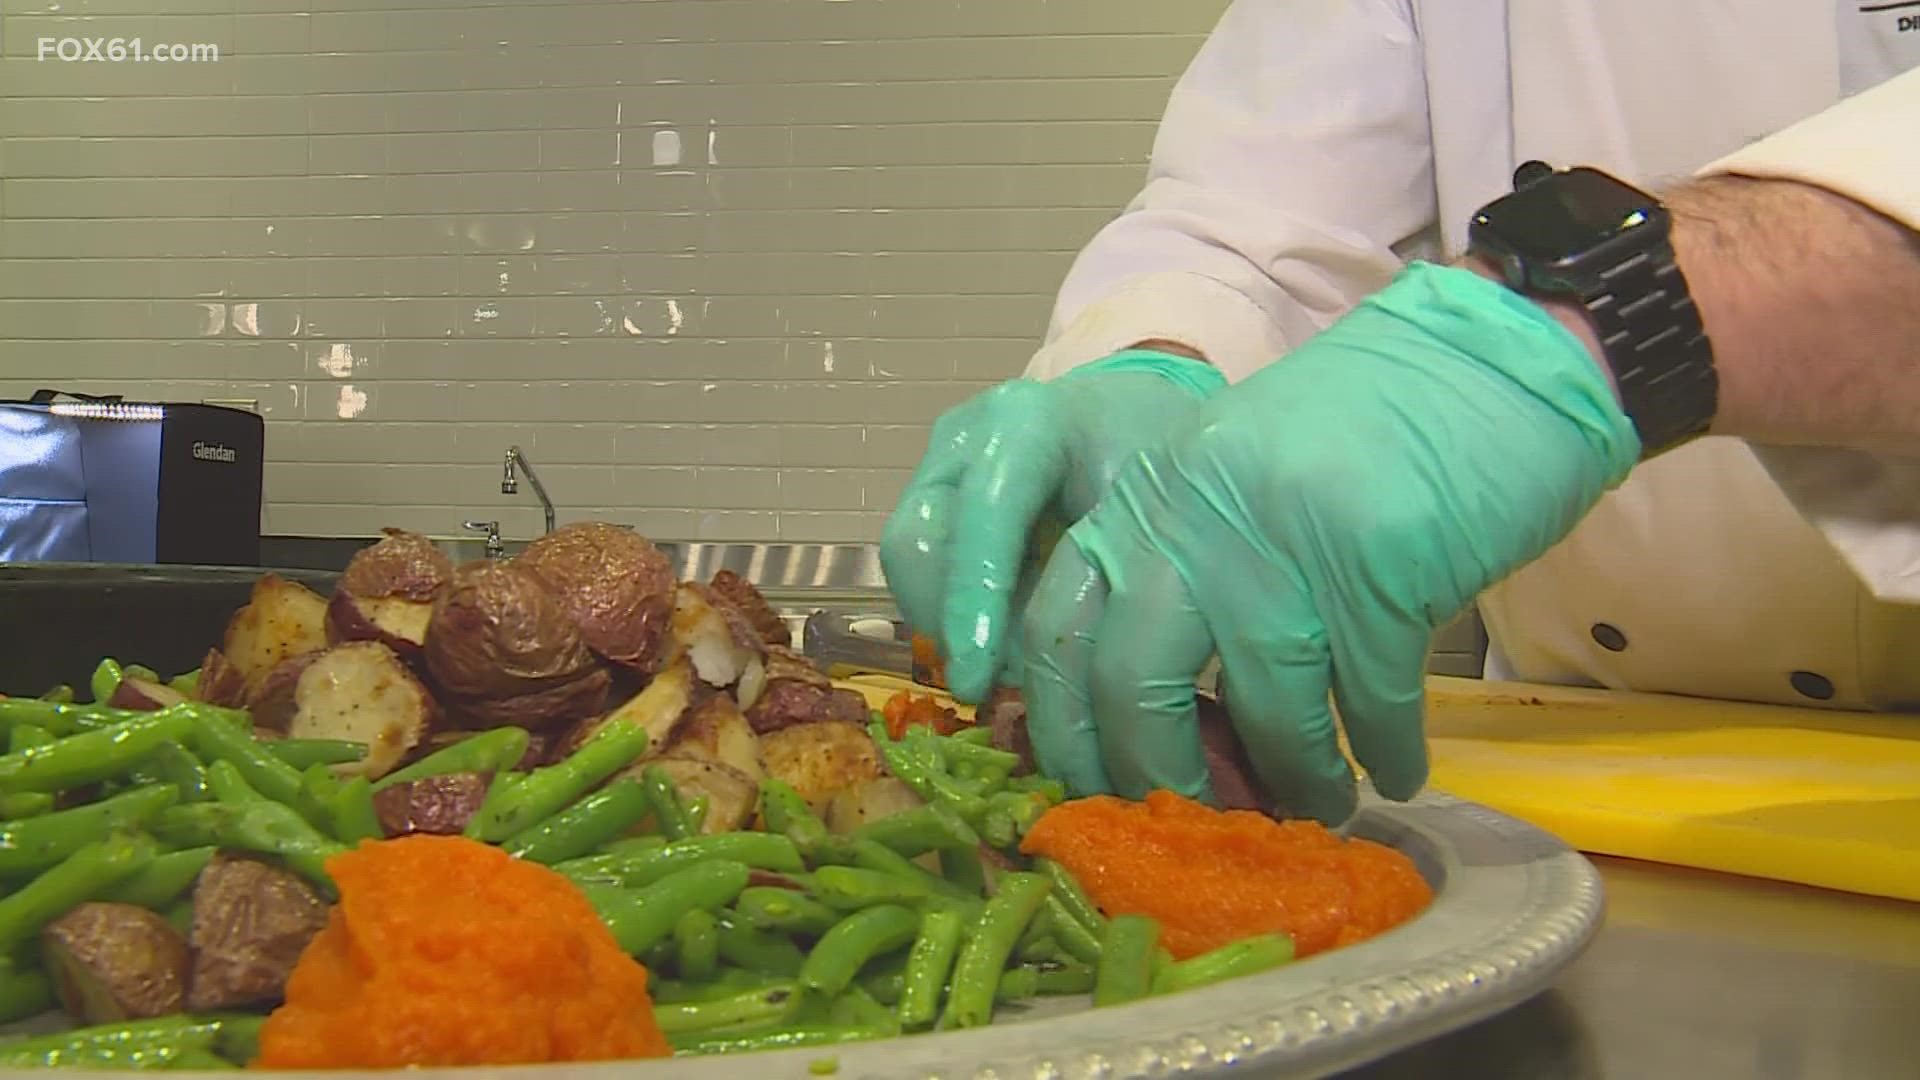 University of Connecticut’s dining services put on its “Culinary Olympics” which challenges its dining hall staff in a sort of “Top Chef” competition.